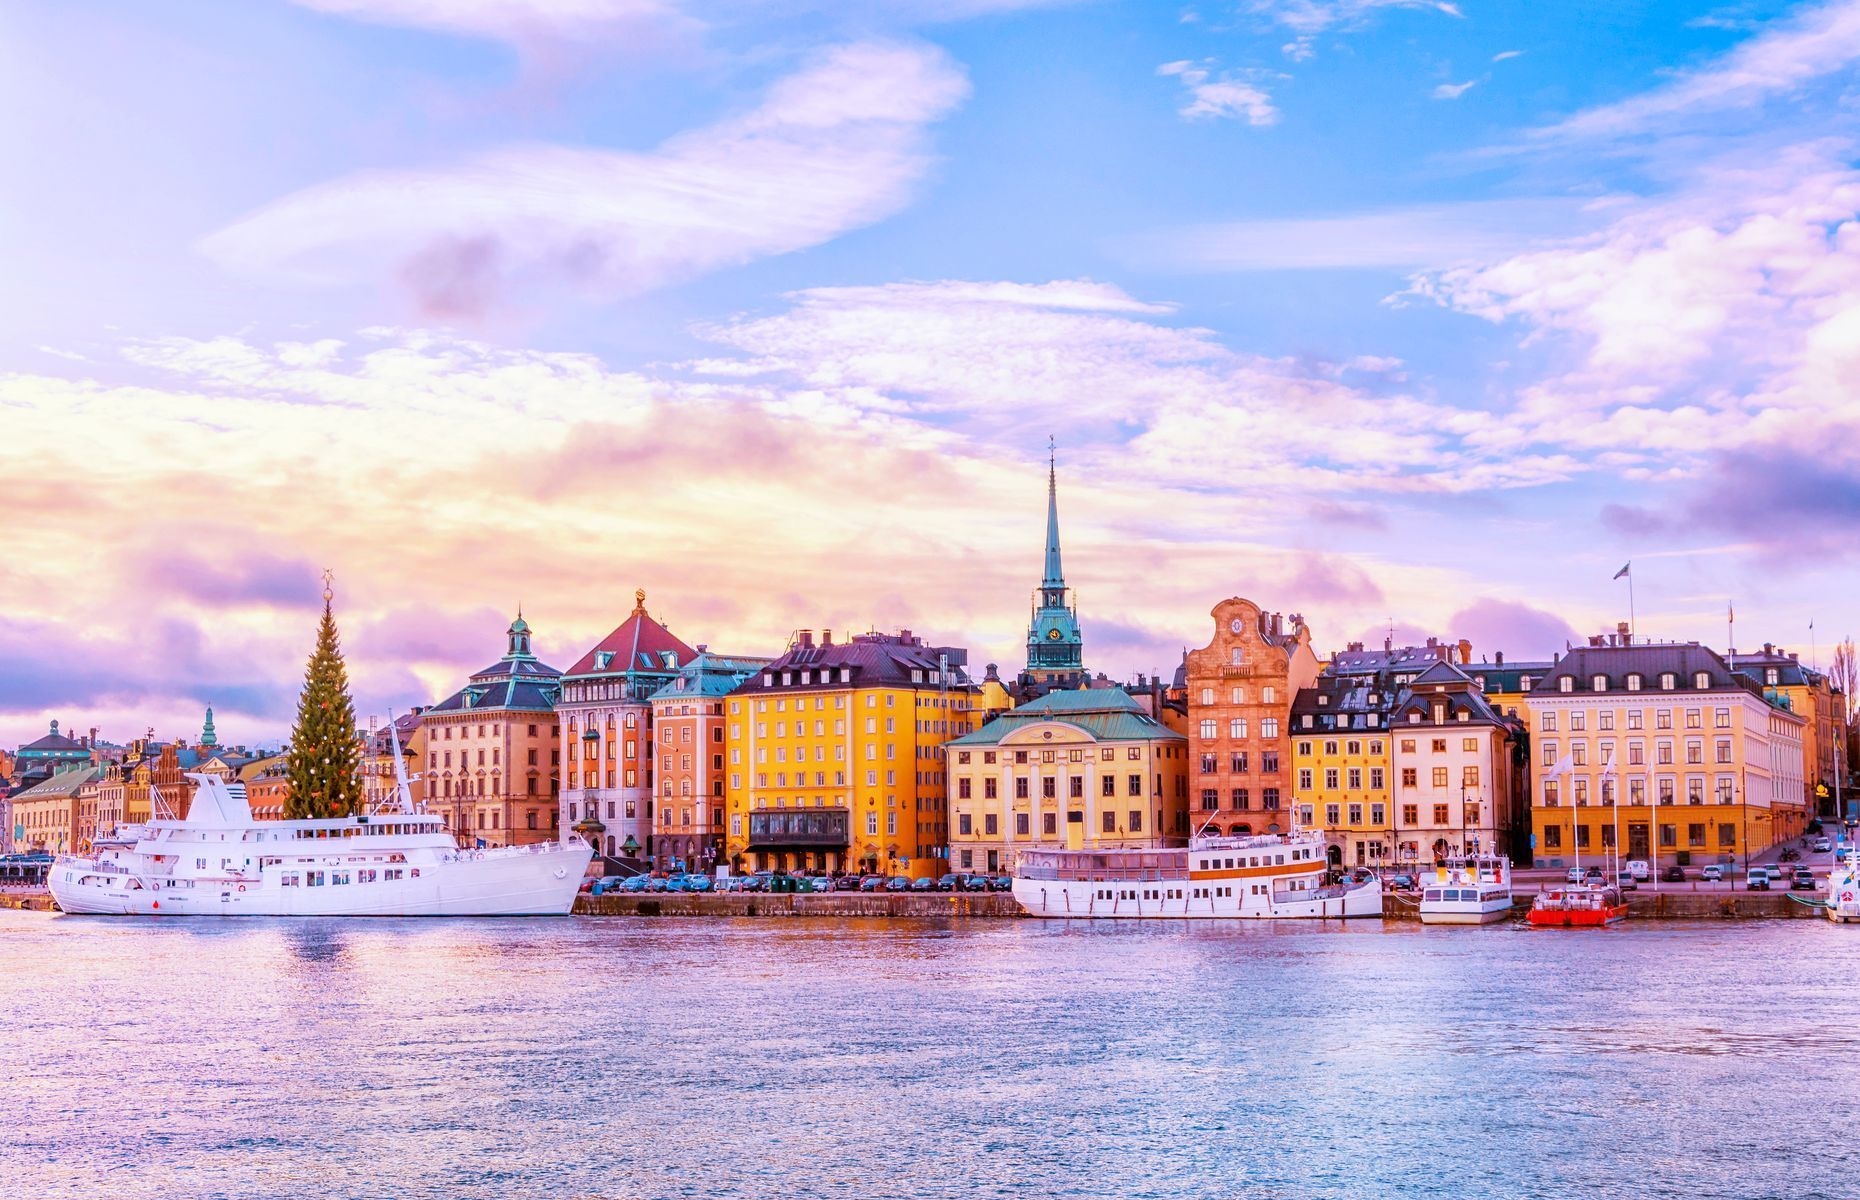 <p>Sweden celebrates its national holiday on <a href="https://www.swedenabroad.se/en/embassies/singapore-singapore/current/news/the-swedish-community-celebrates-national-day-on-june-6/" rel="noreferrer noopener">June 6</a>. As one of the happiest countries in the world (ranked <a href="https://worldhappiness.report/ed/2022/happiness-benevolence-and-trust-during-covid-19-and-beyond/" rel="noreferrer noopener">seventh</a> in 2022), this destination is as intriguing as it is multifaceted. From its vast green spaces to Stockholm’s Old Town, Sweden is sure to charm. Discover 20 interesting facts about this country as well as inspiring places to visit.</p>